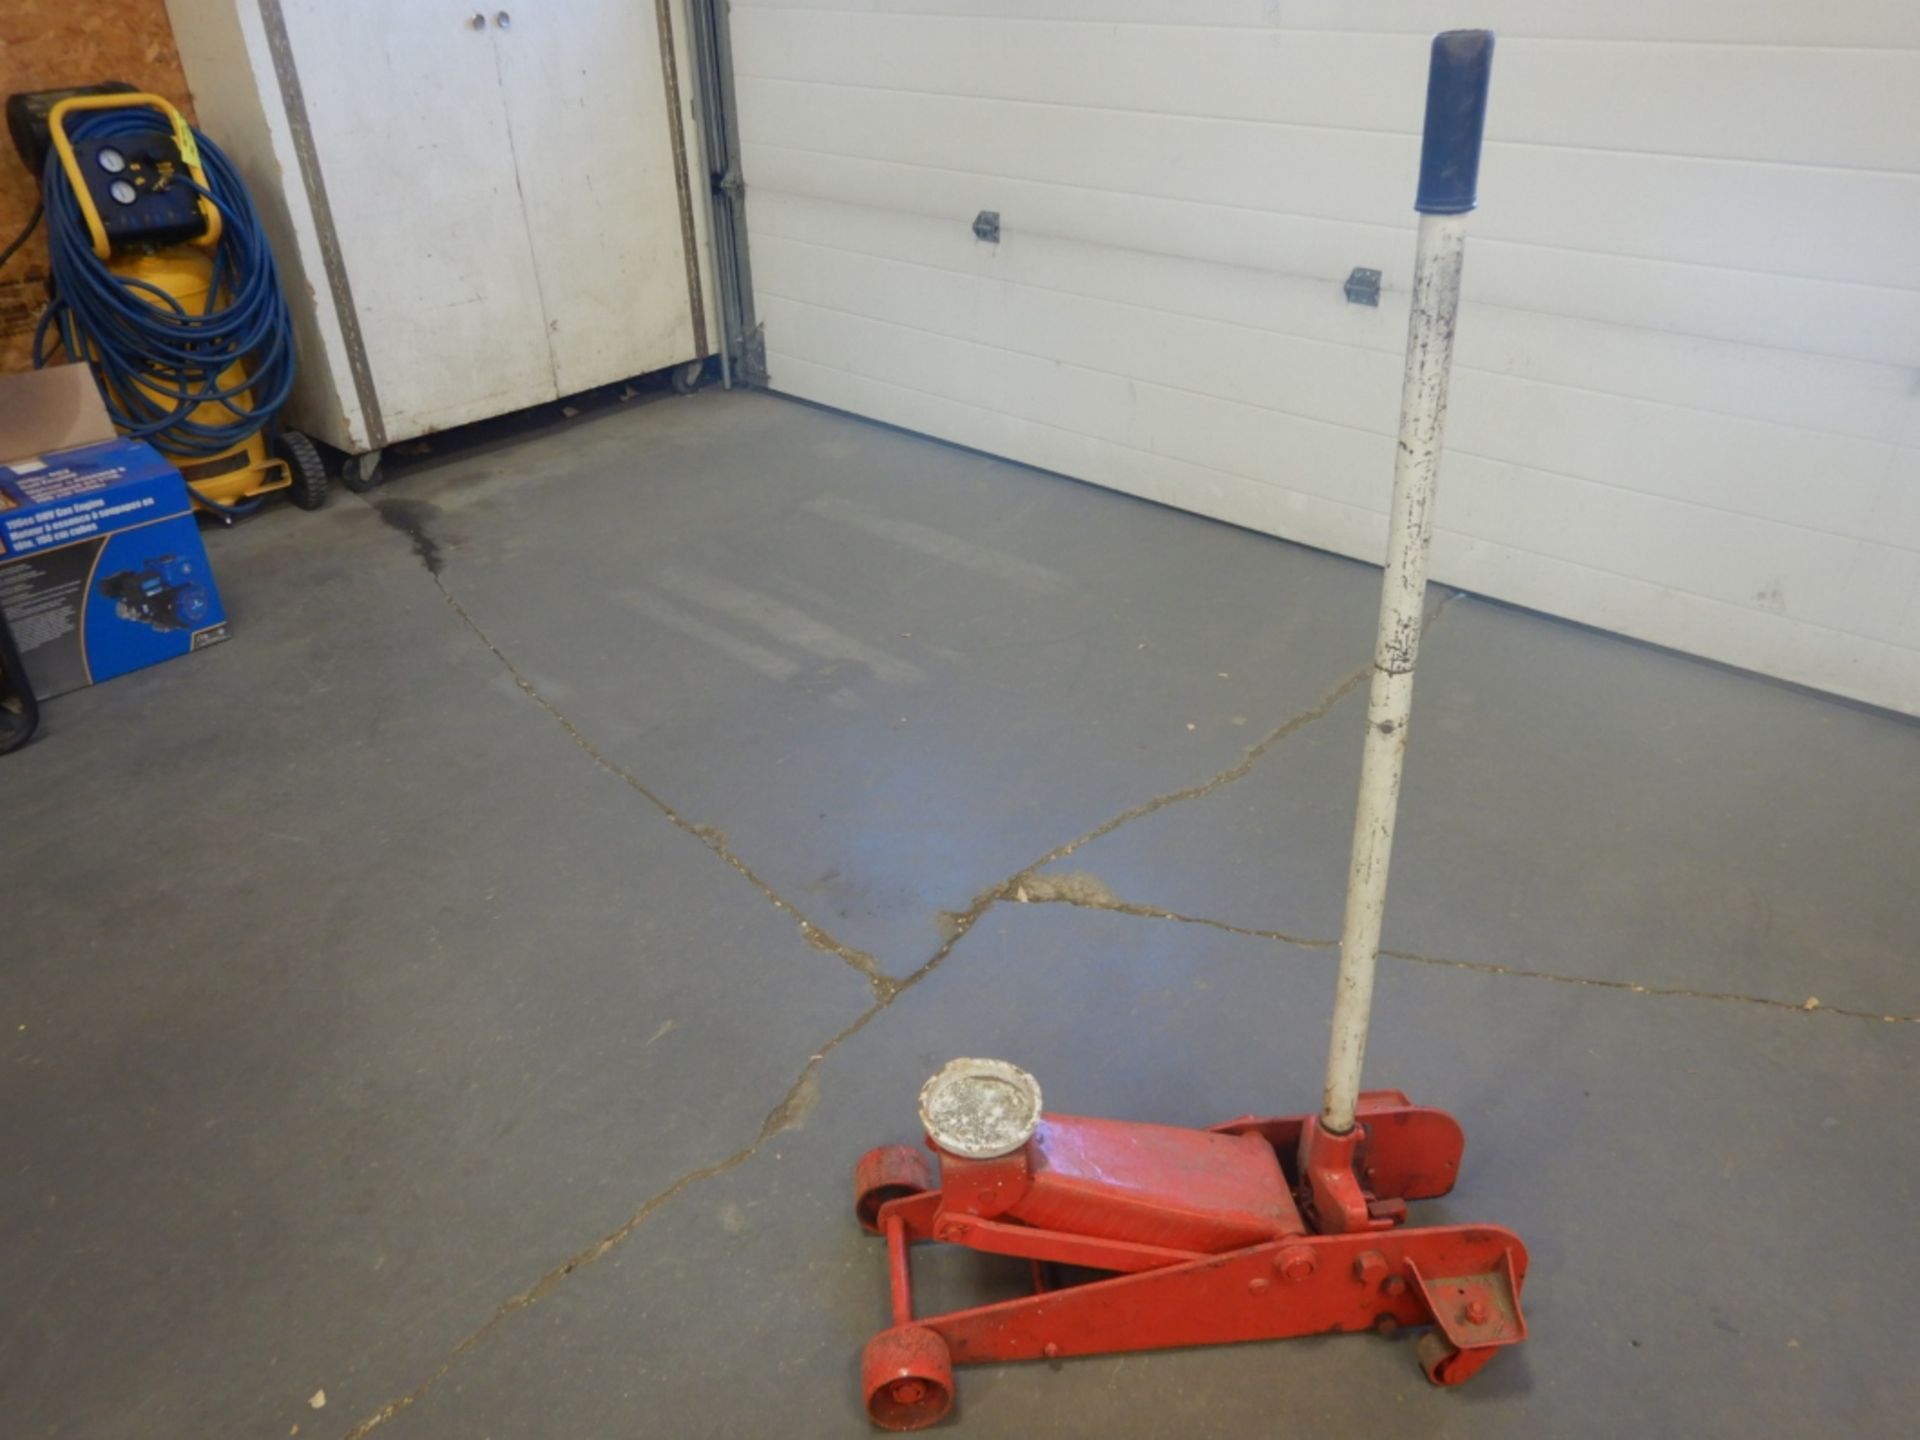 AUTOMOTIVE HYD. FLOOR JACK PAINTED RED AND WHITE